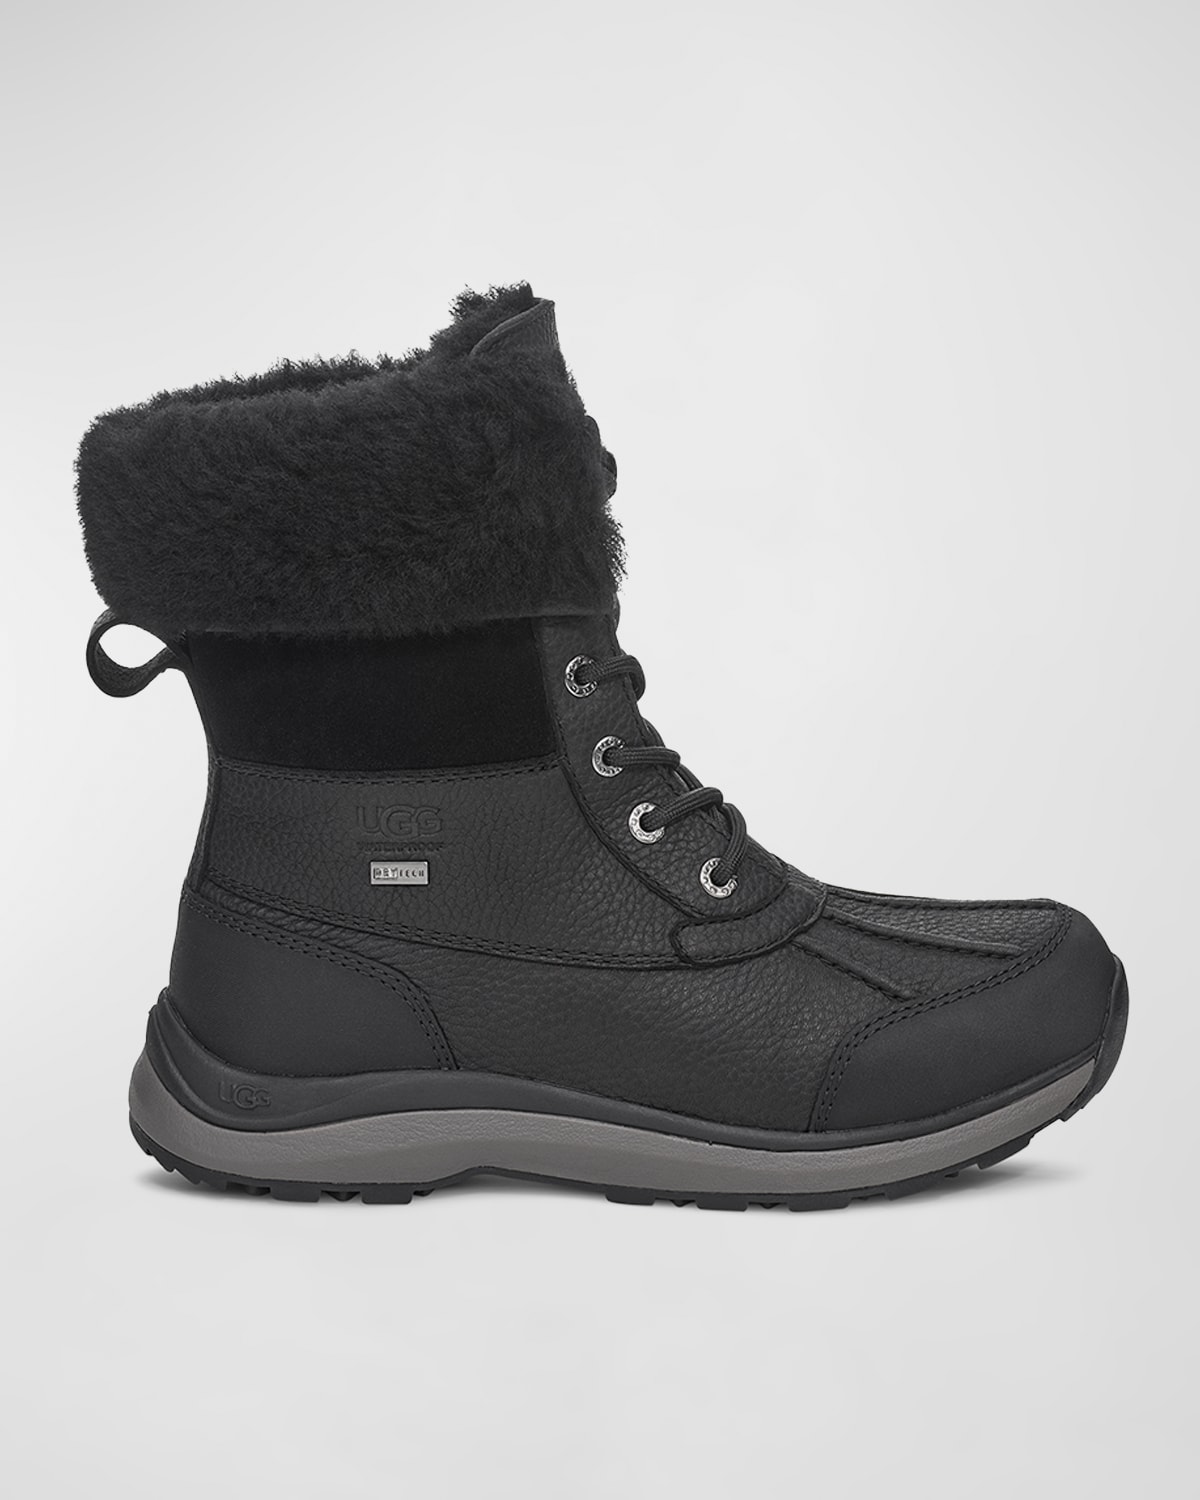 Shop Ugg Adirondack Iii Waterproof Lace-up Boots In Black Bblc